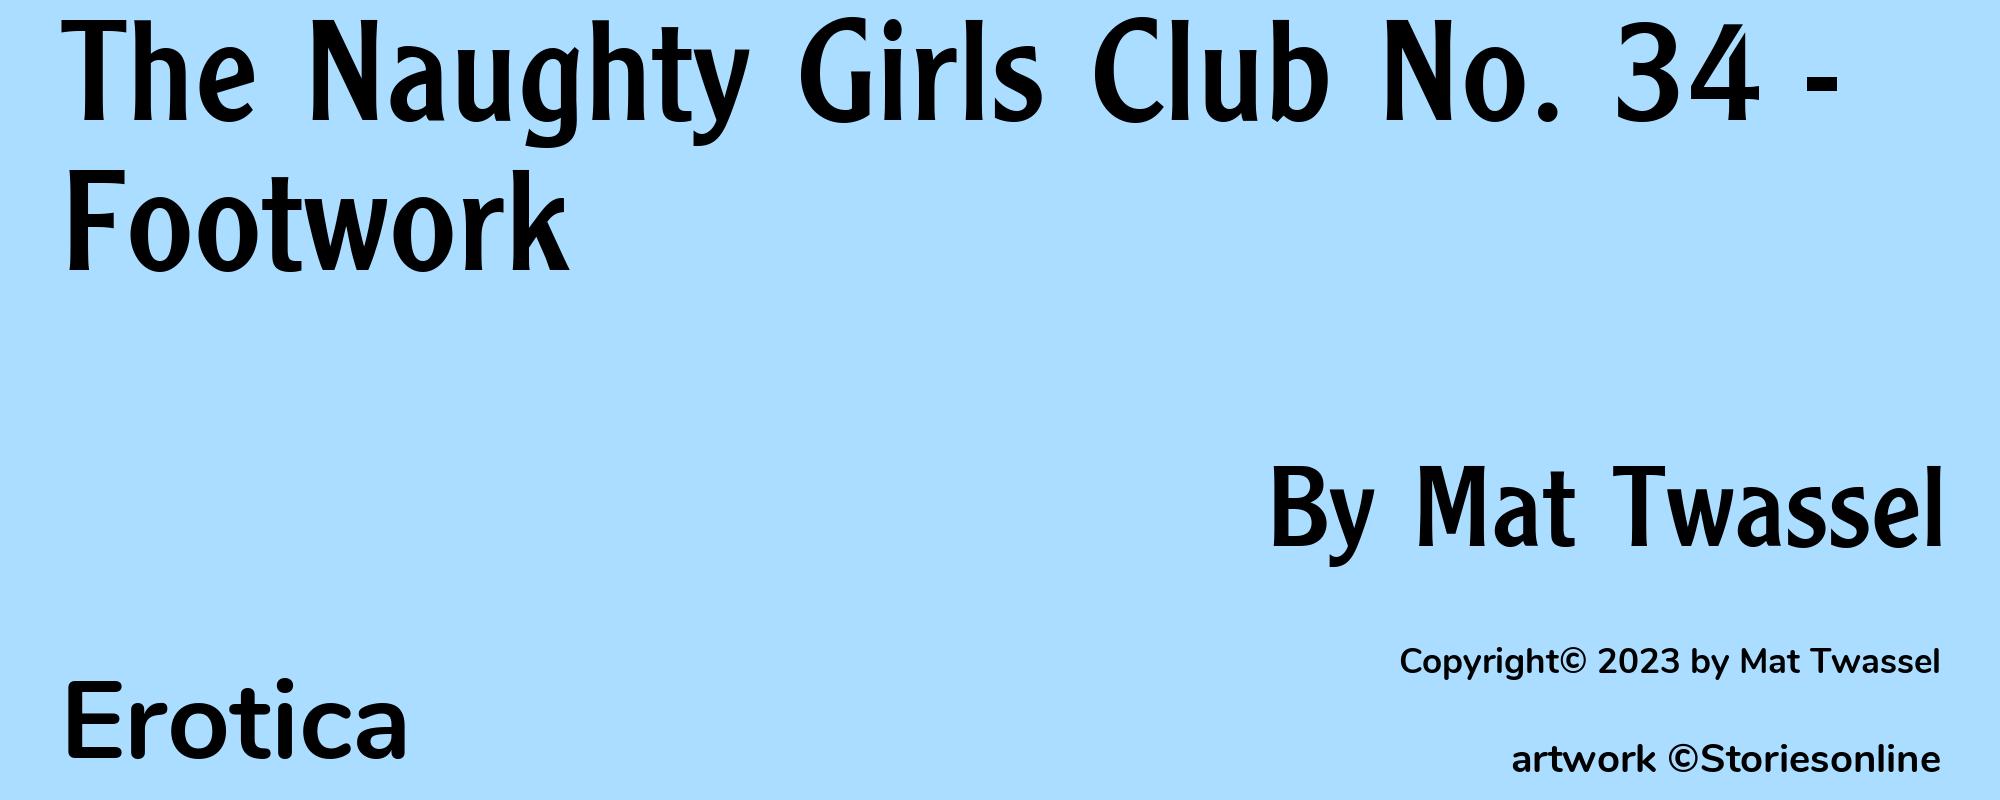 The Naughty Girls Club No. 34 - Footwork - Cover